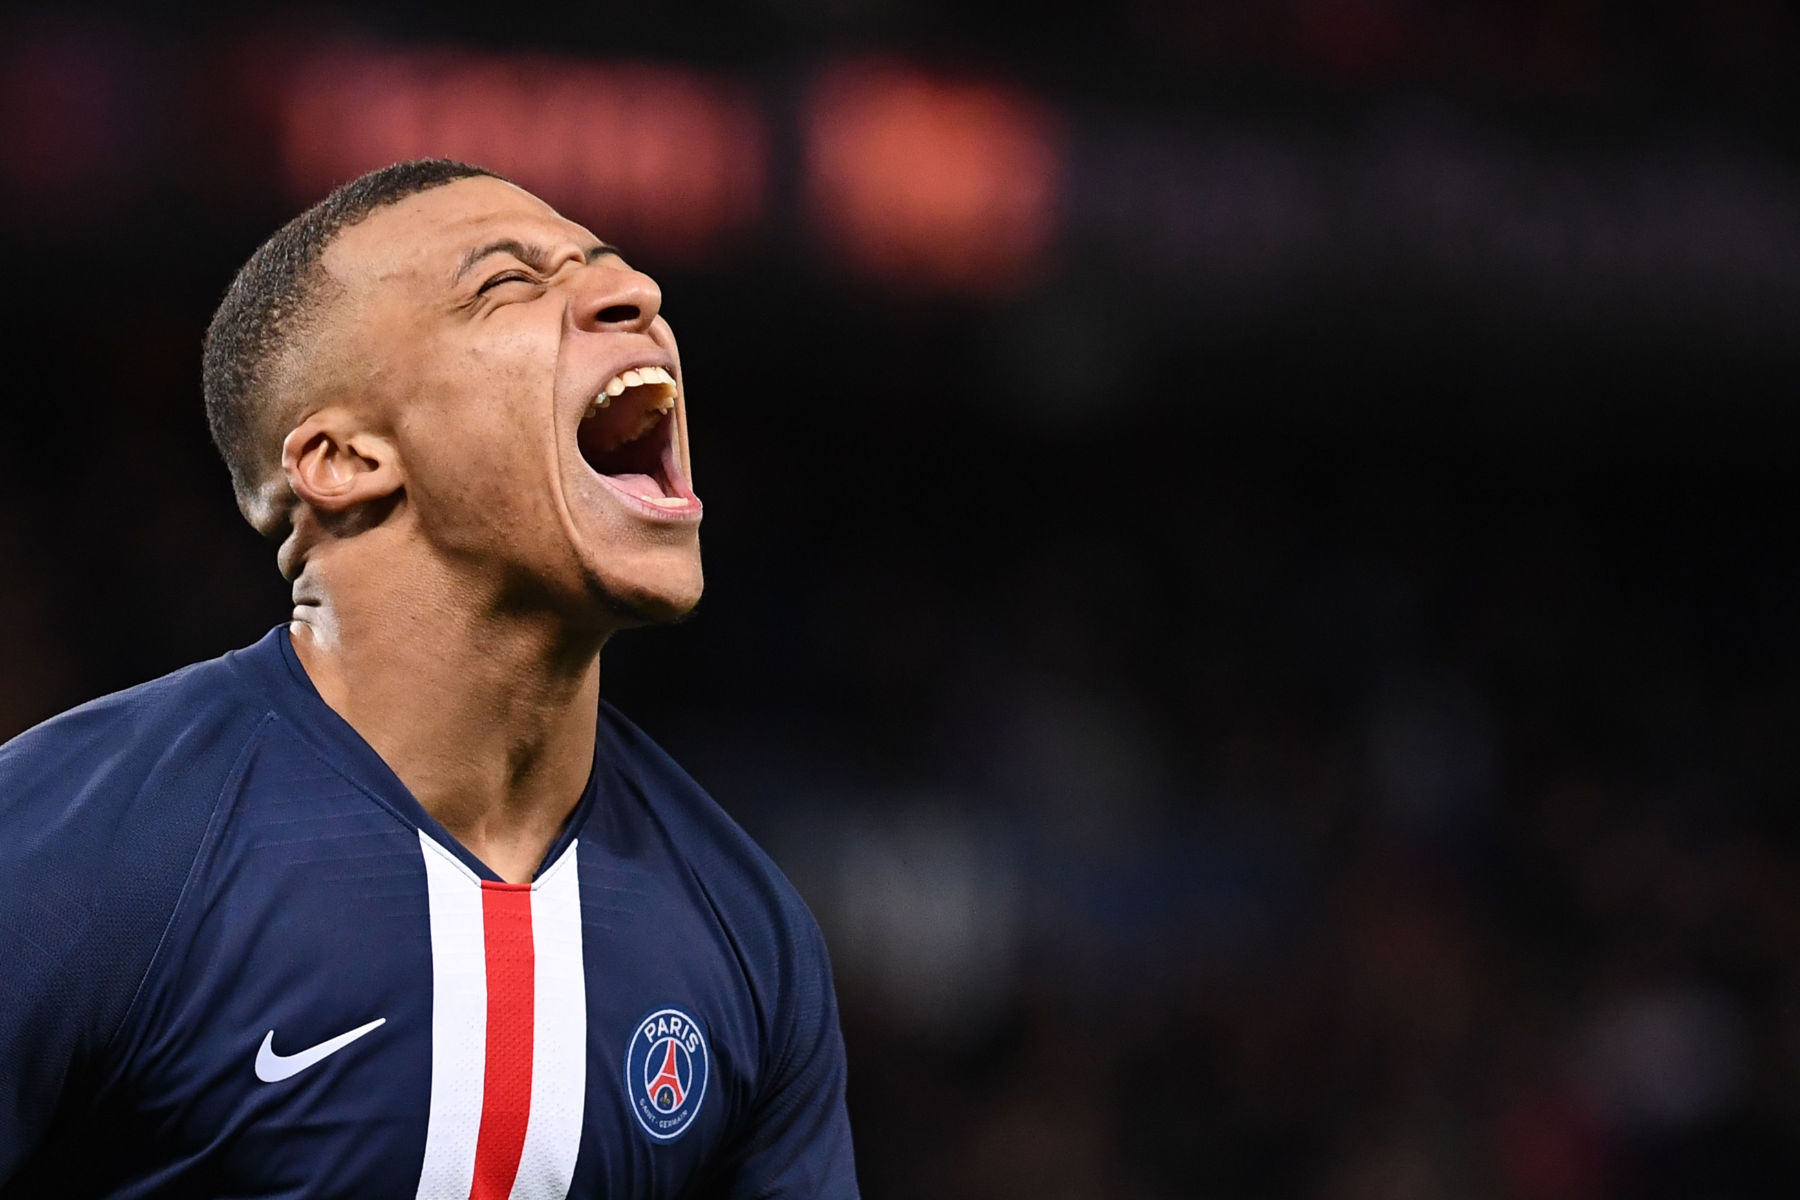 Video: Mbappé and Icardi Pour on the Goals Late Against Dijon - PSG Talk